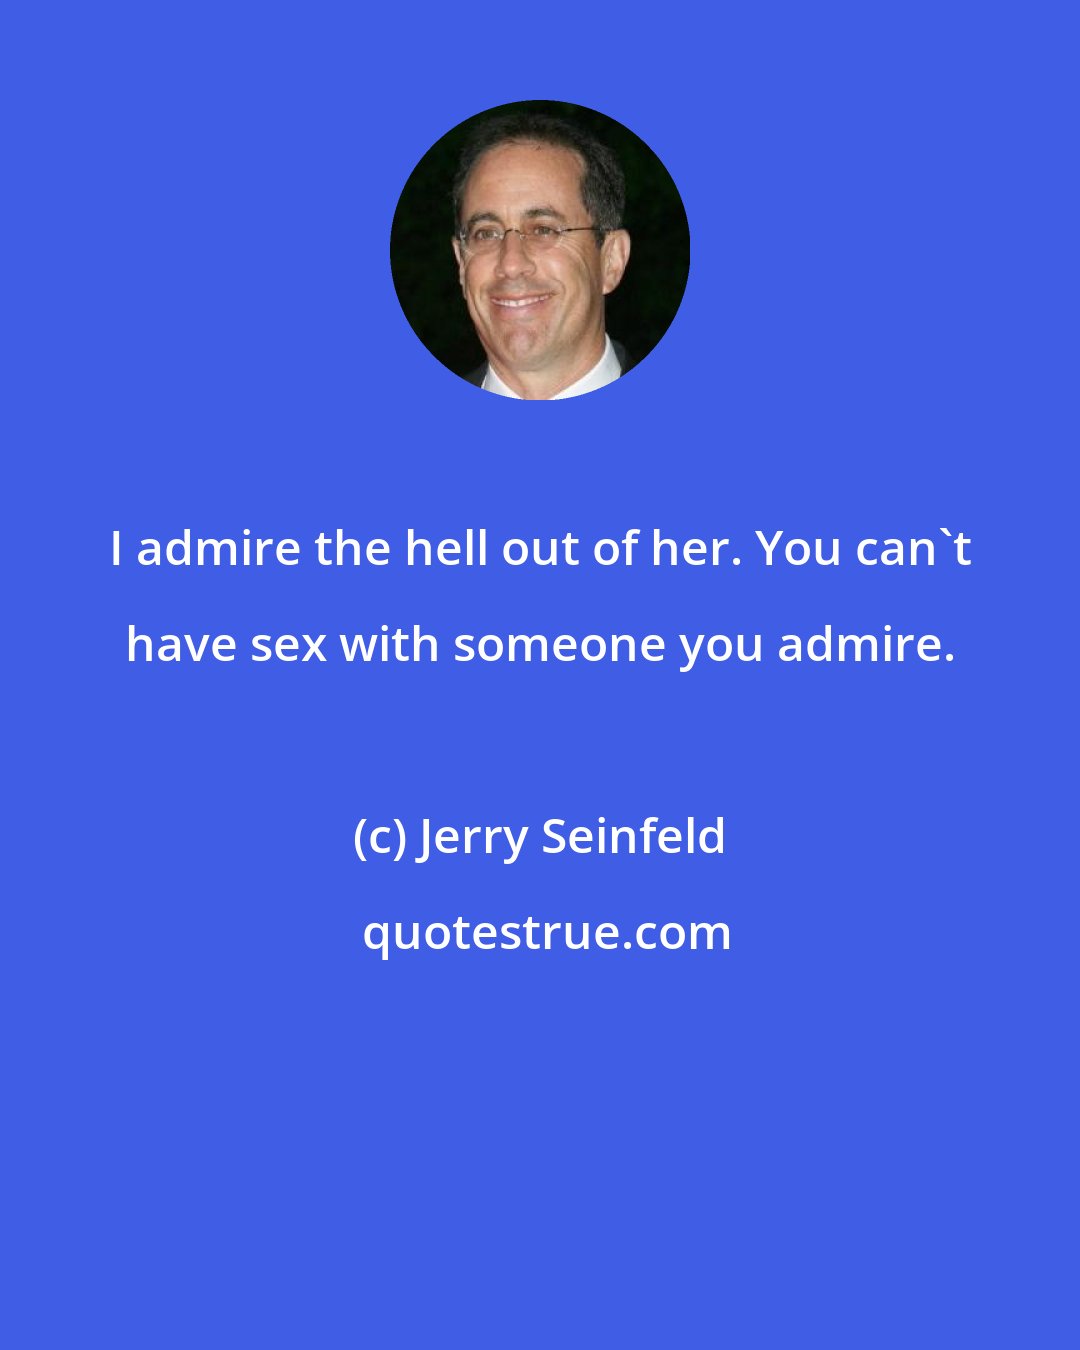 Jerry Seinfeld: I admire the hell out of her. You can't have sex with someone you admire.